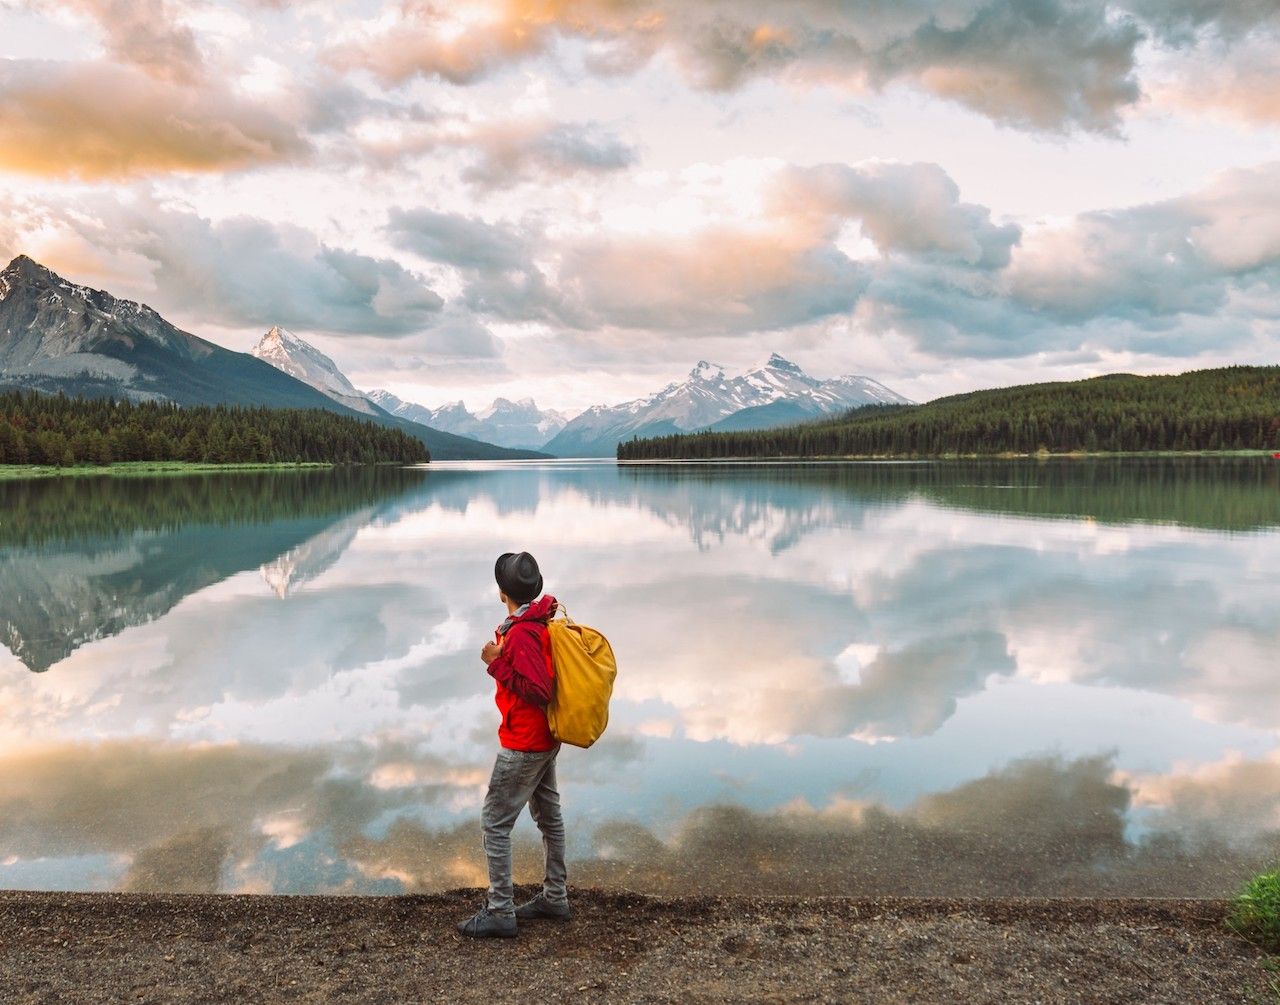 A photographer's memories of moments from Canada: a photoessay